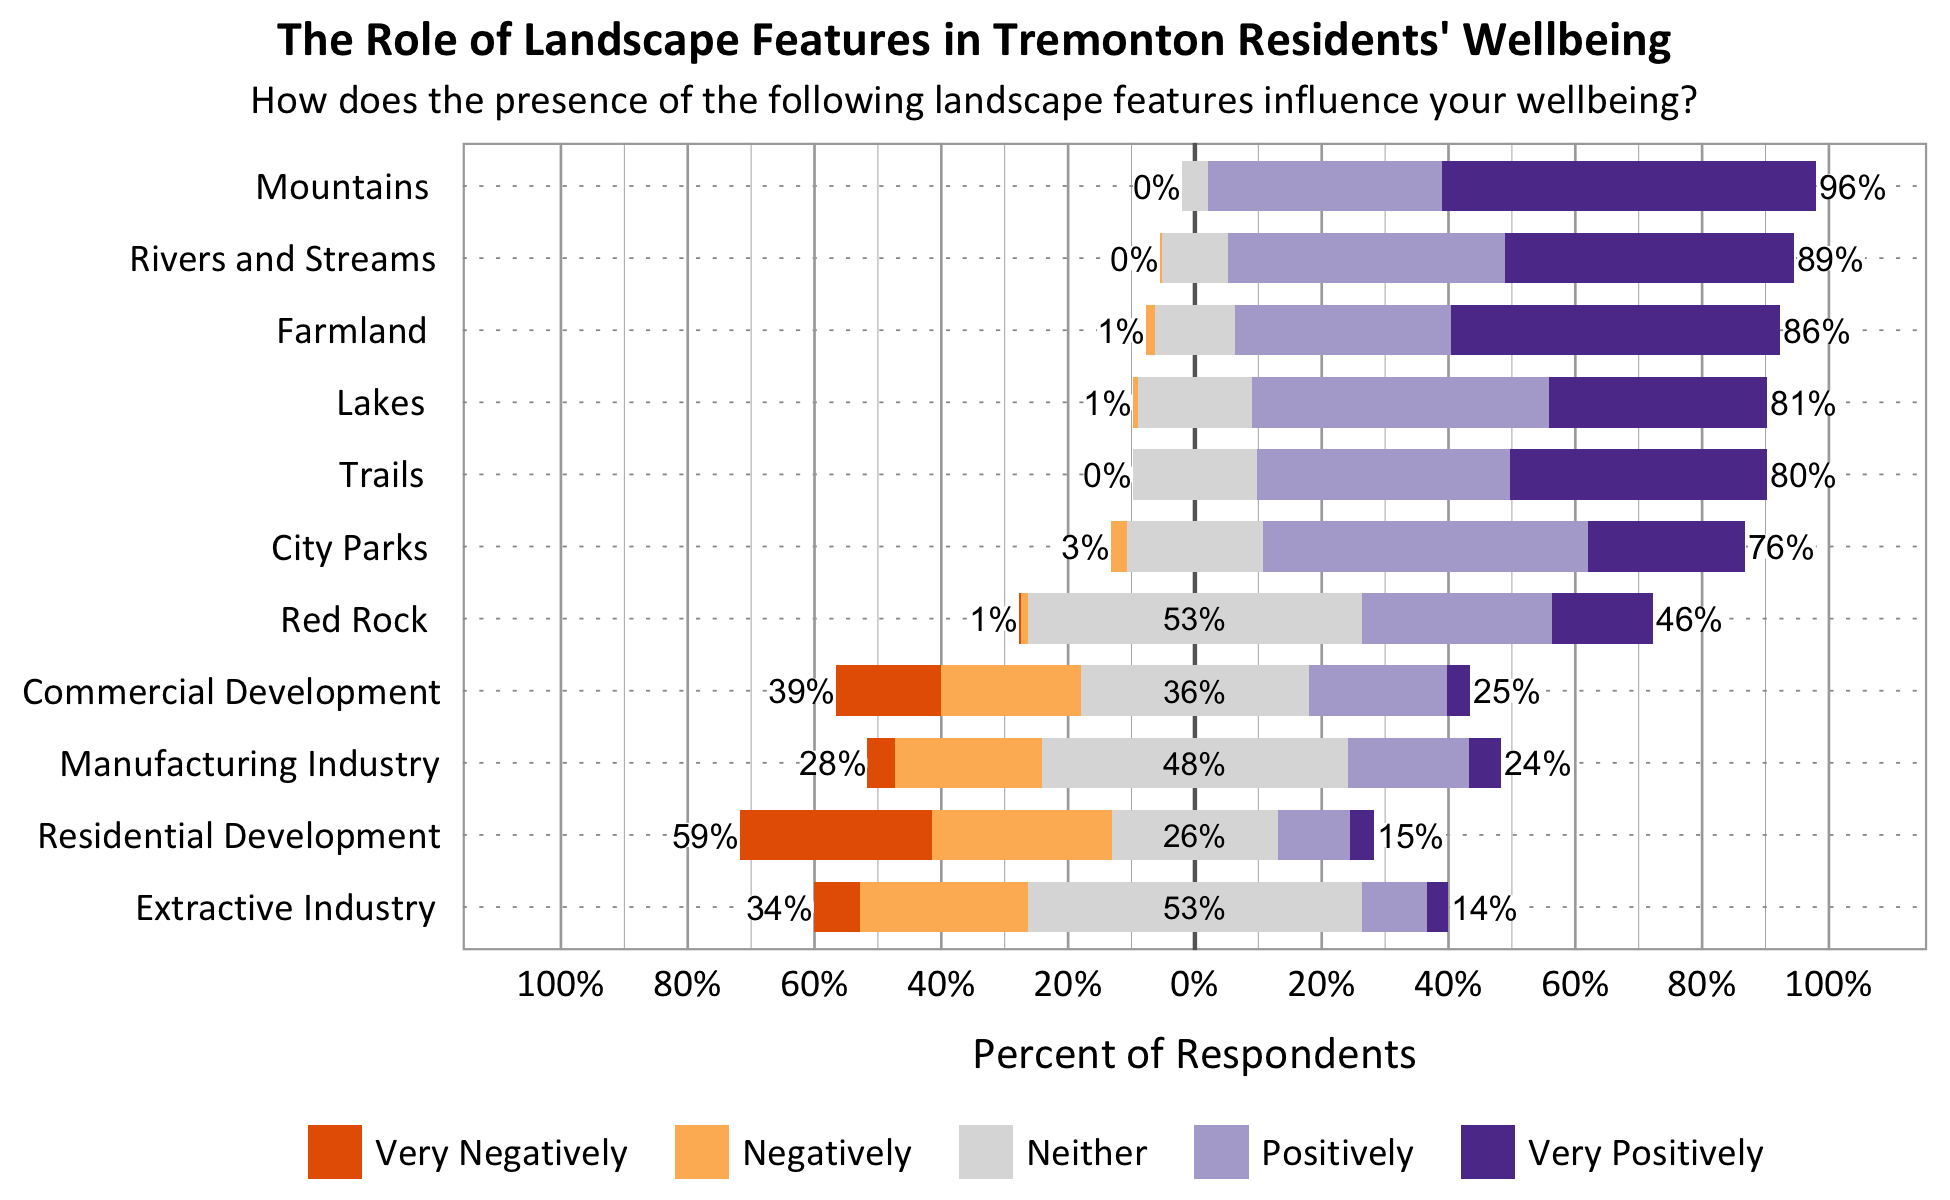 Likert Graph. Title: The Role of Landscape Features in Tremonton Residents' Wellbeing. Subtitle: How does the presence of the following landscape features influence your wellbeing? Feature: Mountains - 0% of respondents indicated very negatively or negatively, 4% indicated neither, 96% indicated positively or very positively; Feature: Rivers and Streams - 0% of respondents indicated very negatively or negatively, 11% indicated neither, 89% indicated positively or very positively; Feature: Lakes - 1% of respondents indicated very negatively or negatively, 18% indicated neither, 81% indicated positively or very positively; Feature: Trails - 0% of respondents indicated very negatively or negatively, 20% indicated neither, 80% indicated positively or very positively; Feature: Red Rock - 1% of respondents indicated very negatively or negatively, 53% indicated neither, 46% indicated positively or very positively; Feature: City Parks - 3% of respondents indicated very negatively or negatively, 21% indicated neither, 76% indicated positively or very positively; Feature: Farmland - 1% of respondents indicated very negatively or negatively, 13% indicated neither, 86% indicated positively or very positively; Feature: Residential Development - 59% of respondents indicated very negatively or negatively, 26% indicated neither, 15% indicated positively or very positively; Feature: Commercial Development - 39% of respondents indicated very negatively or negatively, 36% indicated neither, 25% indicated positively or very positively; Feature: Extractive Industry - 34% of respondents indicated very negatively or negatively, 53% indicated neither, 14% indicated positively or very positively; Feature: Manufacturing Industry - 28% of respondents indicated very negatively or negatively, 48% indicated neither, 24% indicated positively or very positively.